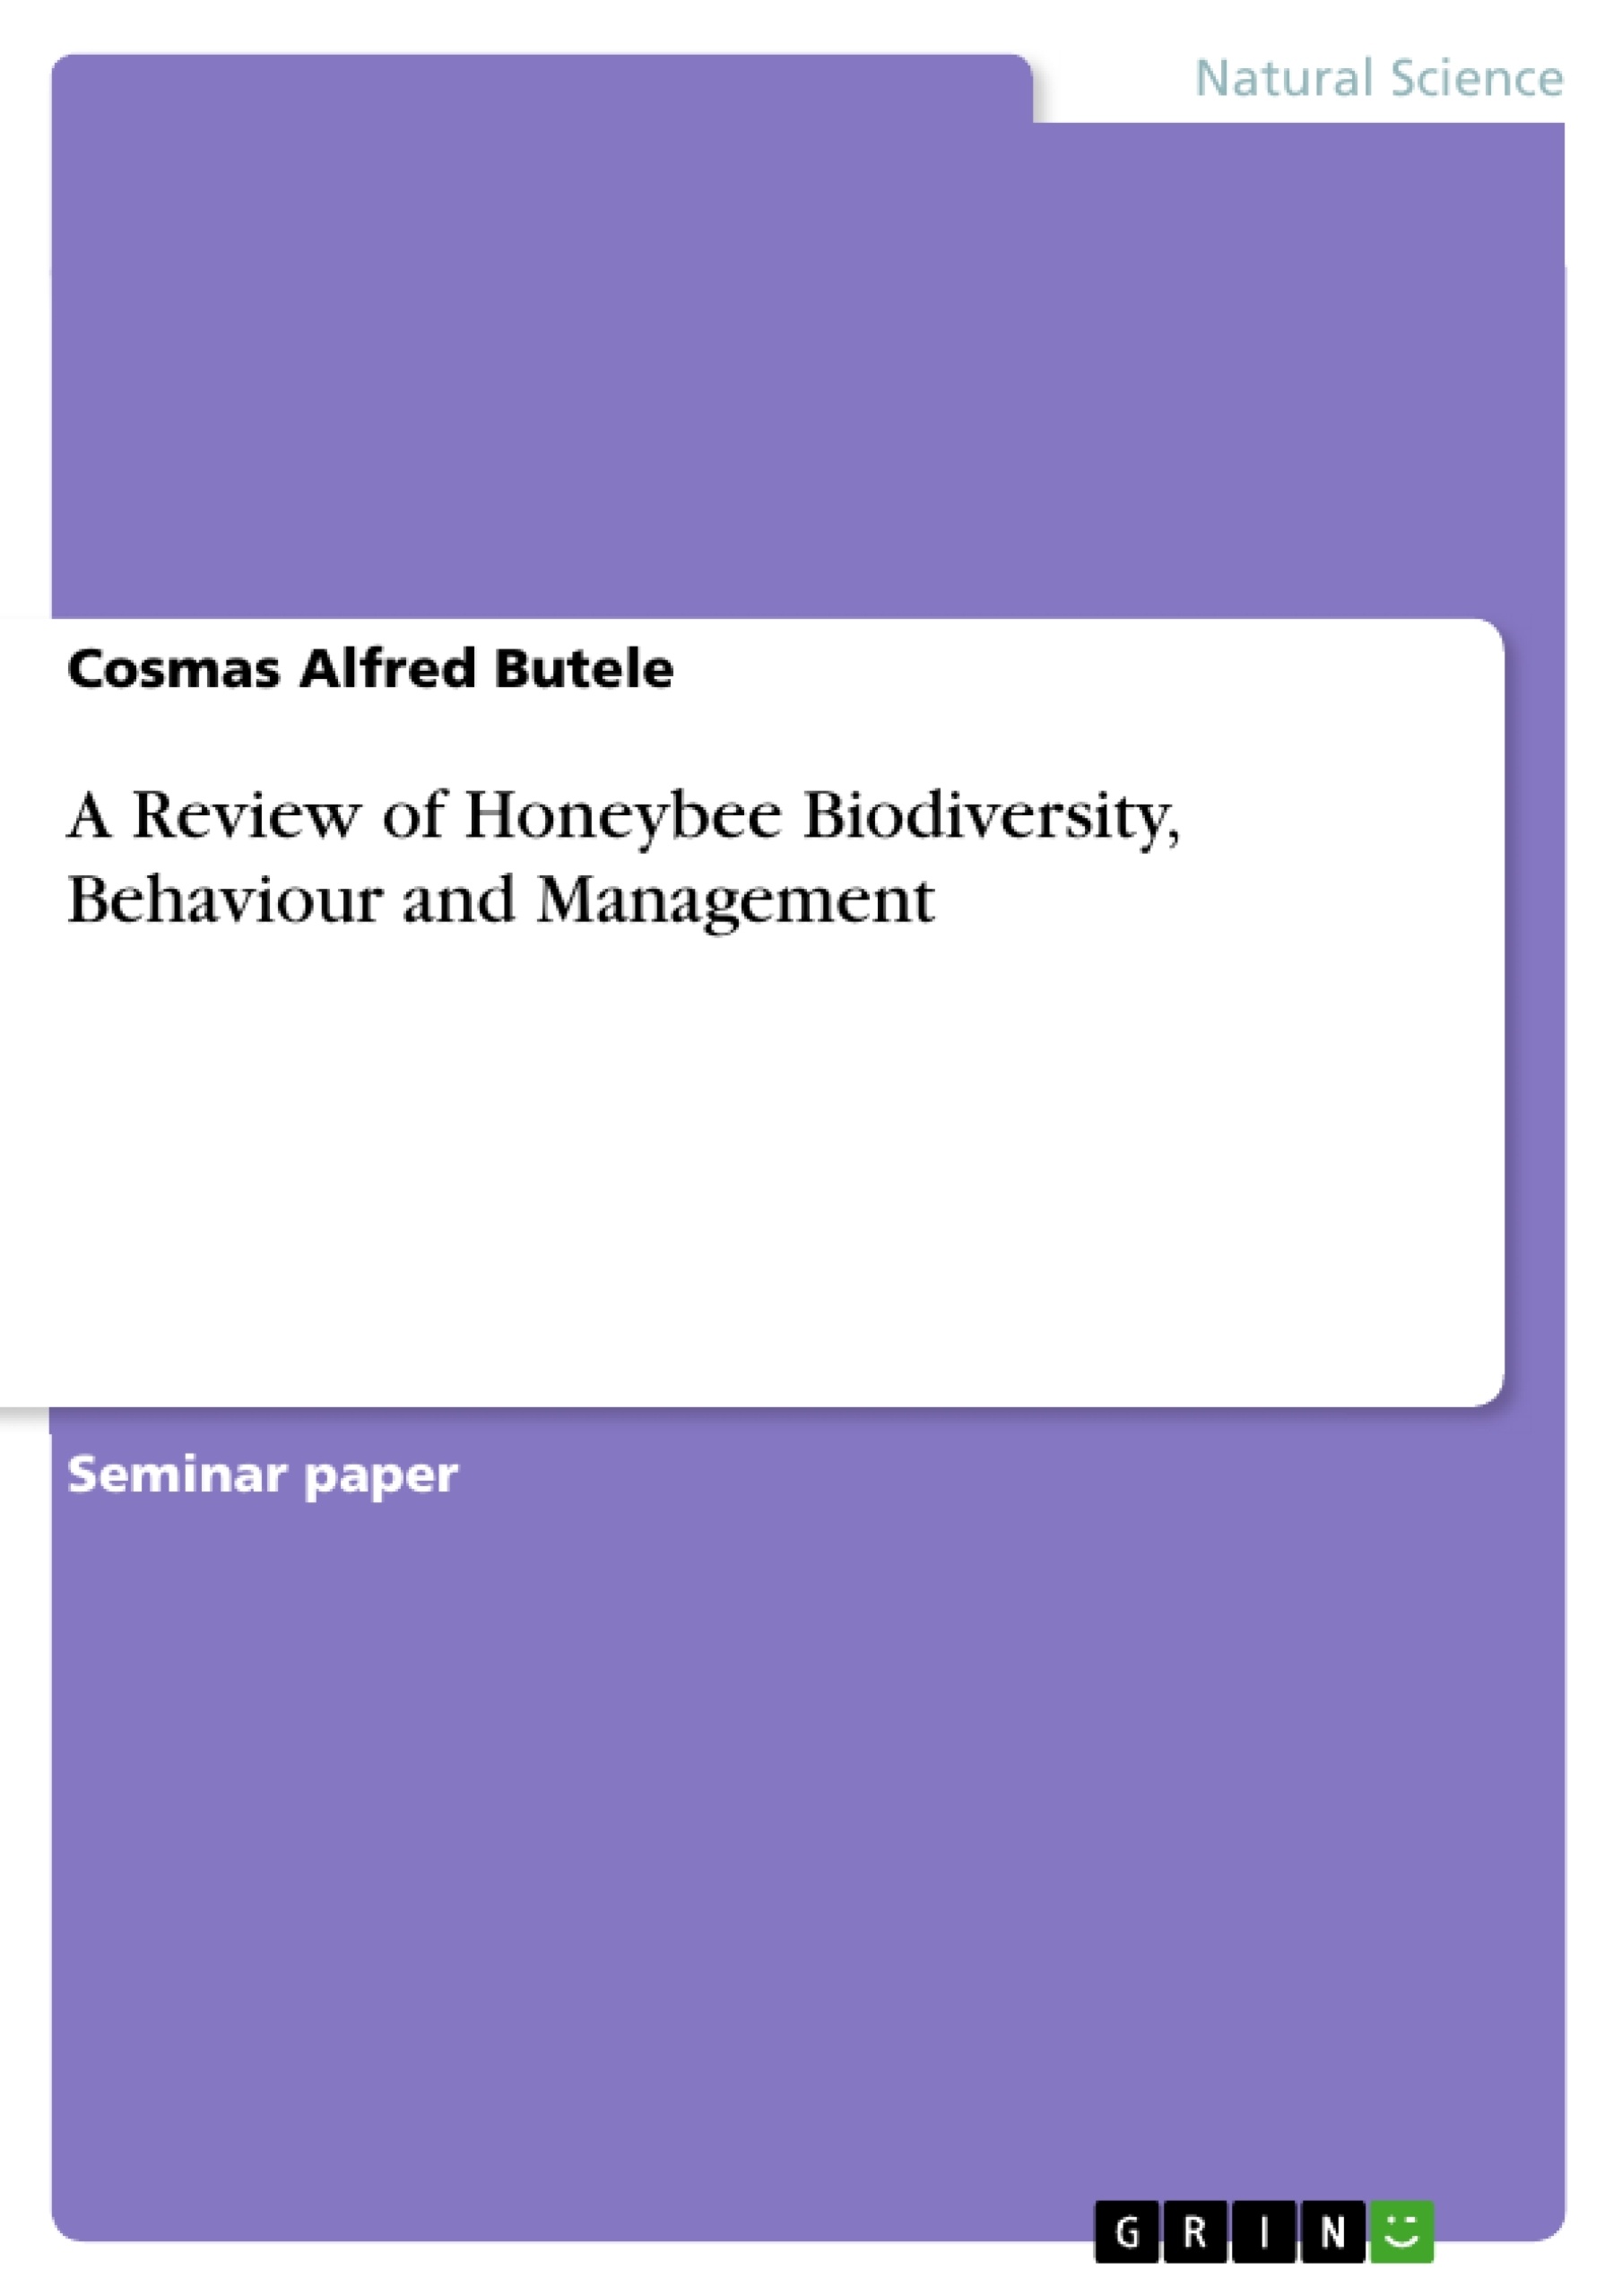 Titre: A Review of Honeybee Biodiversity, Behaviour and Management